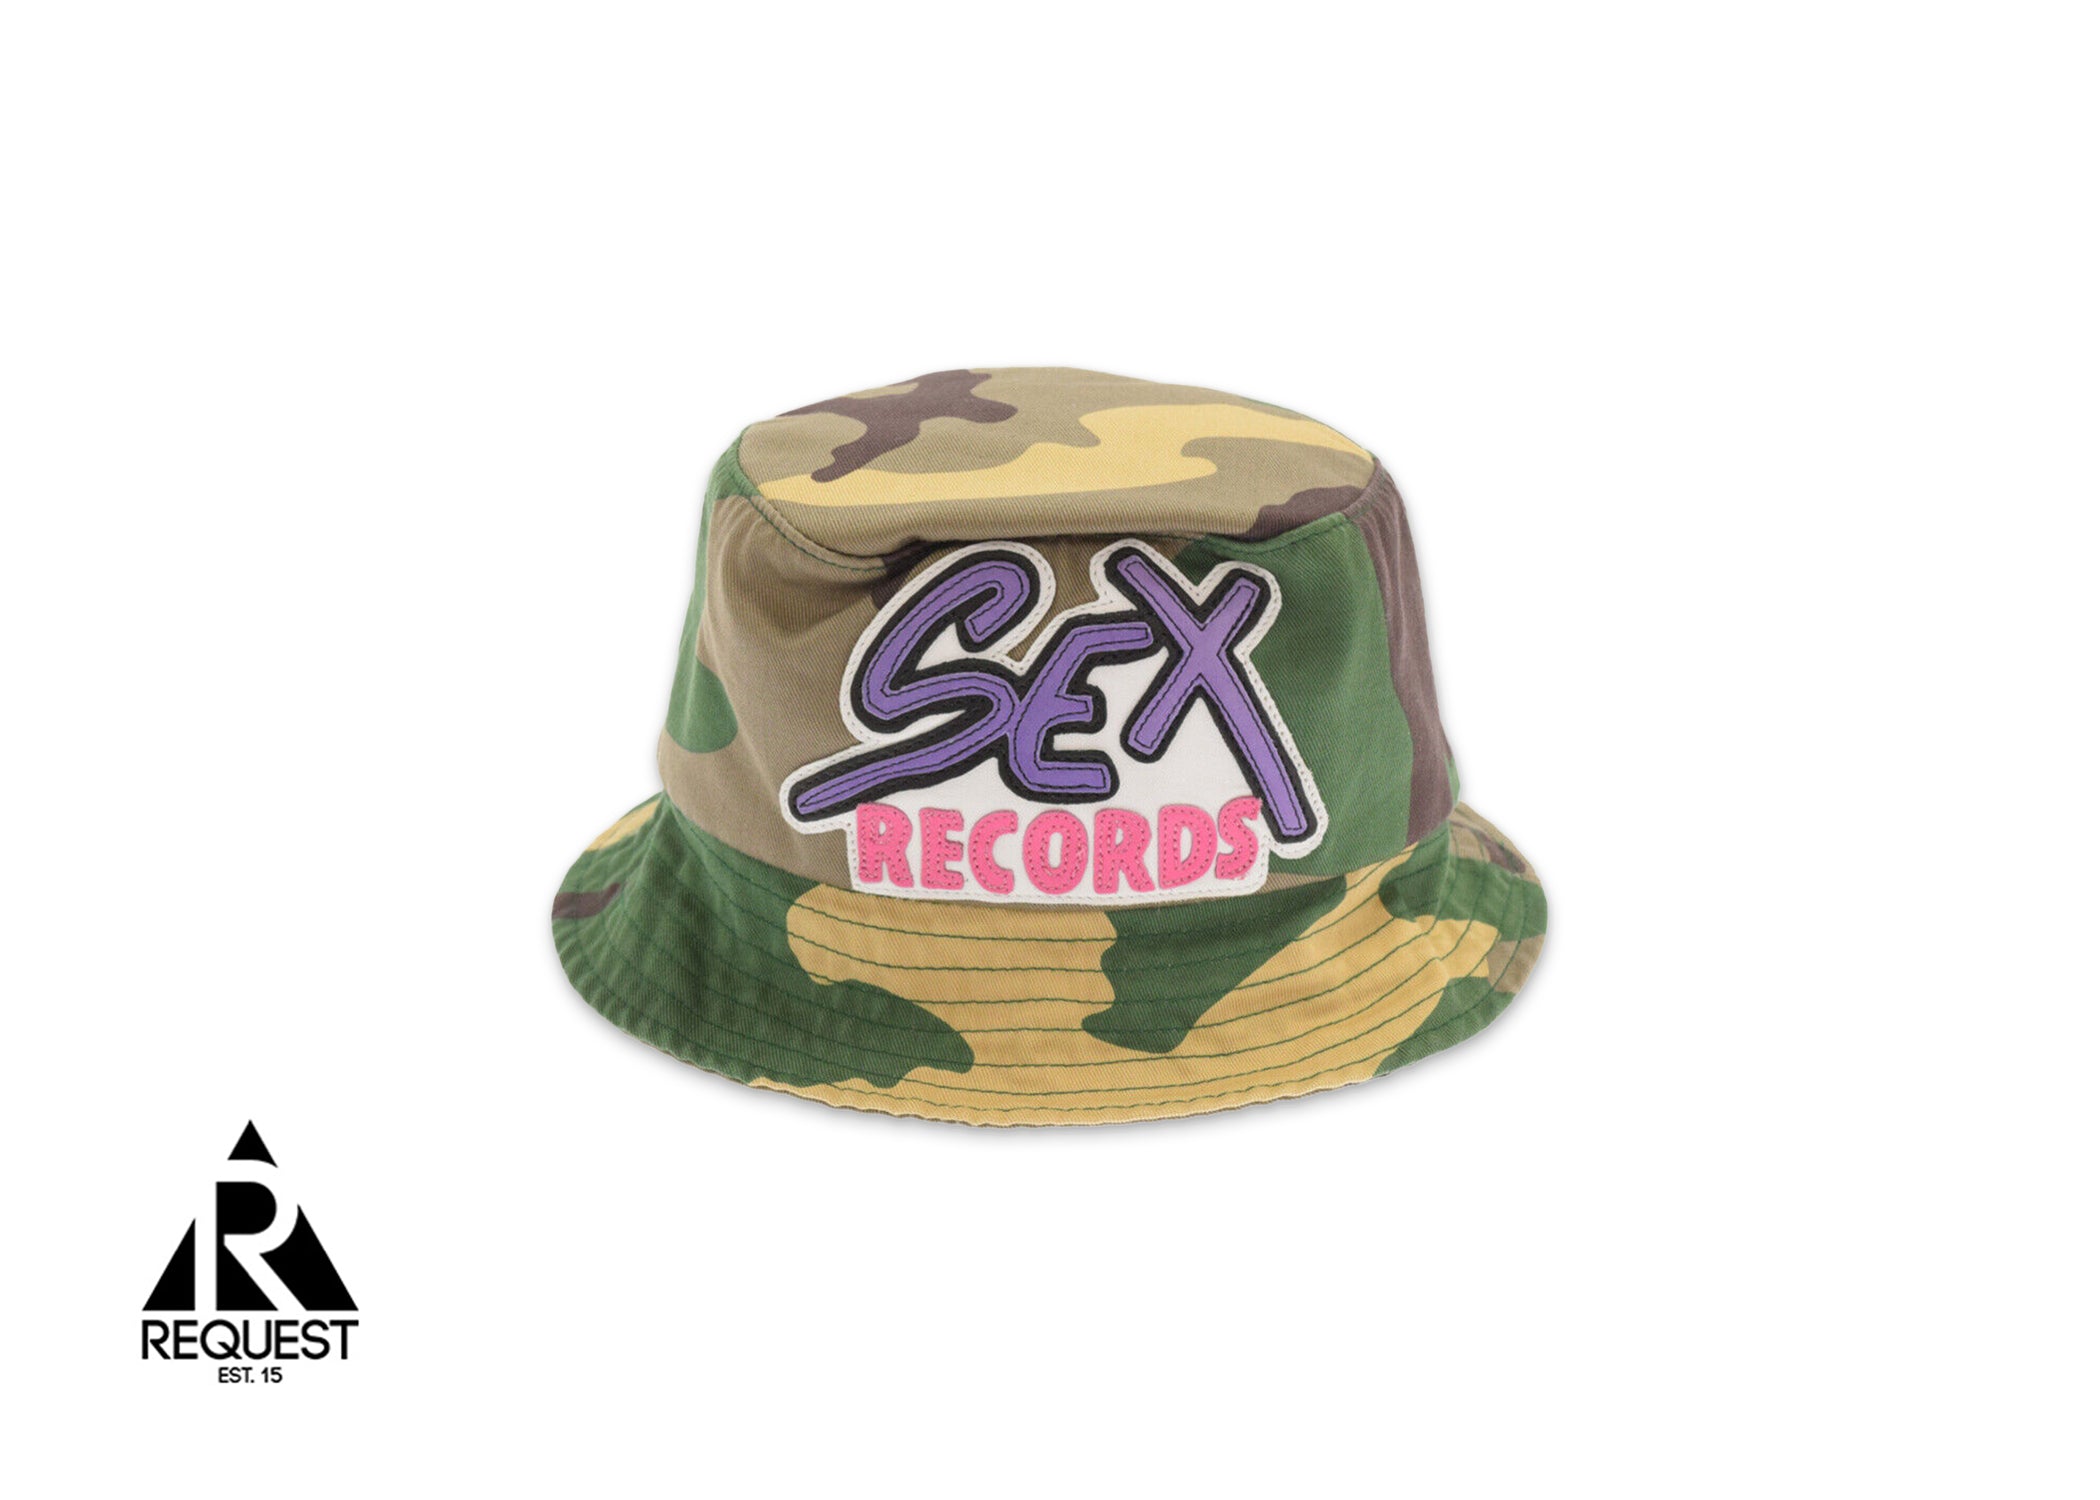 Chrome Hearts Sex Records Bucket Hat "Green Camouflage"